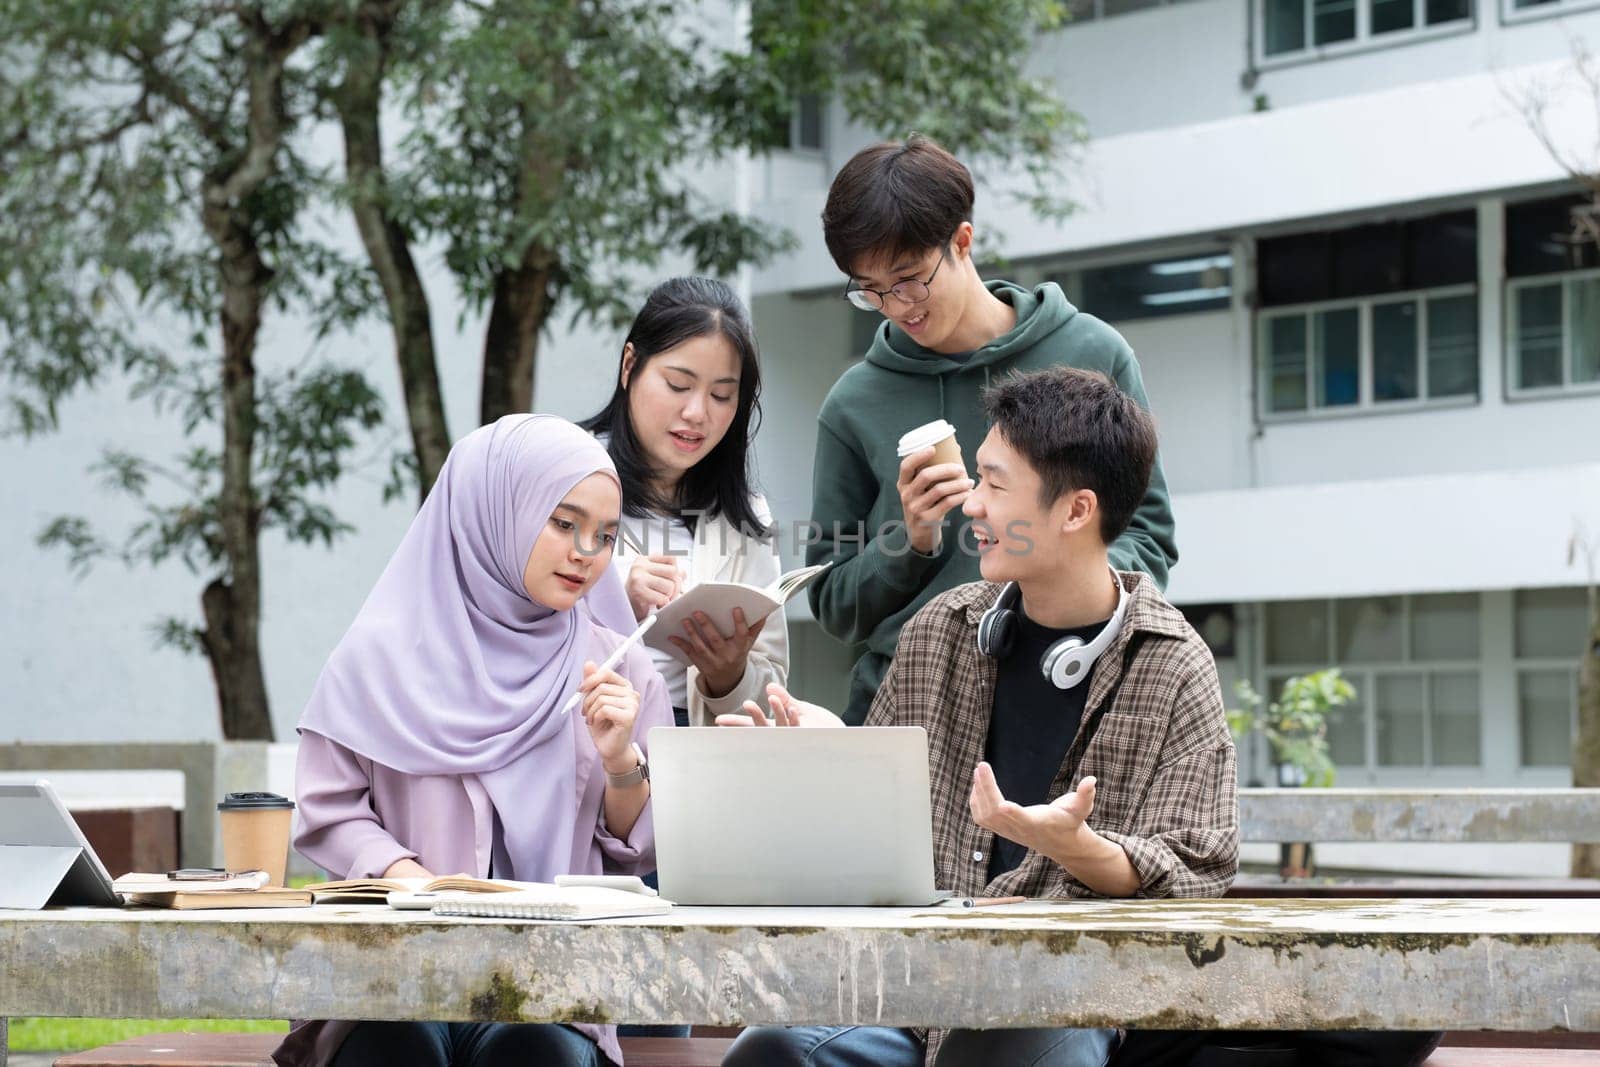 Student friendship concept with multiracial diverse classmate friend sitting together at campus college park. Millennial people having fun social gathering outside. Youth teenage and education.